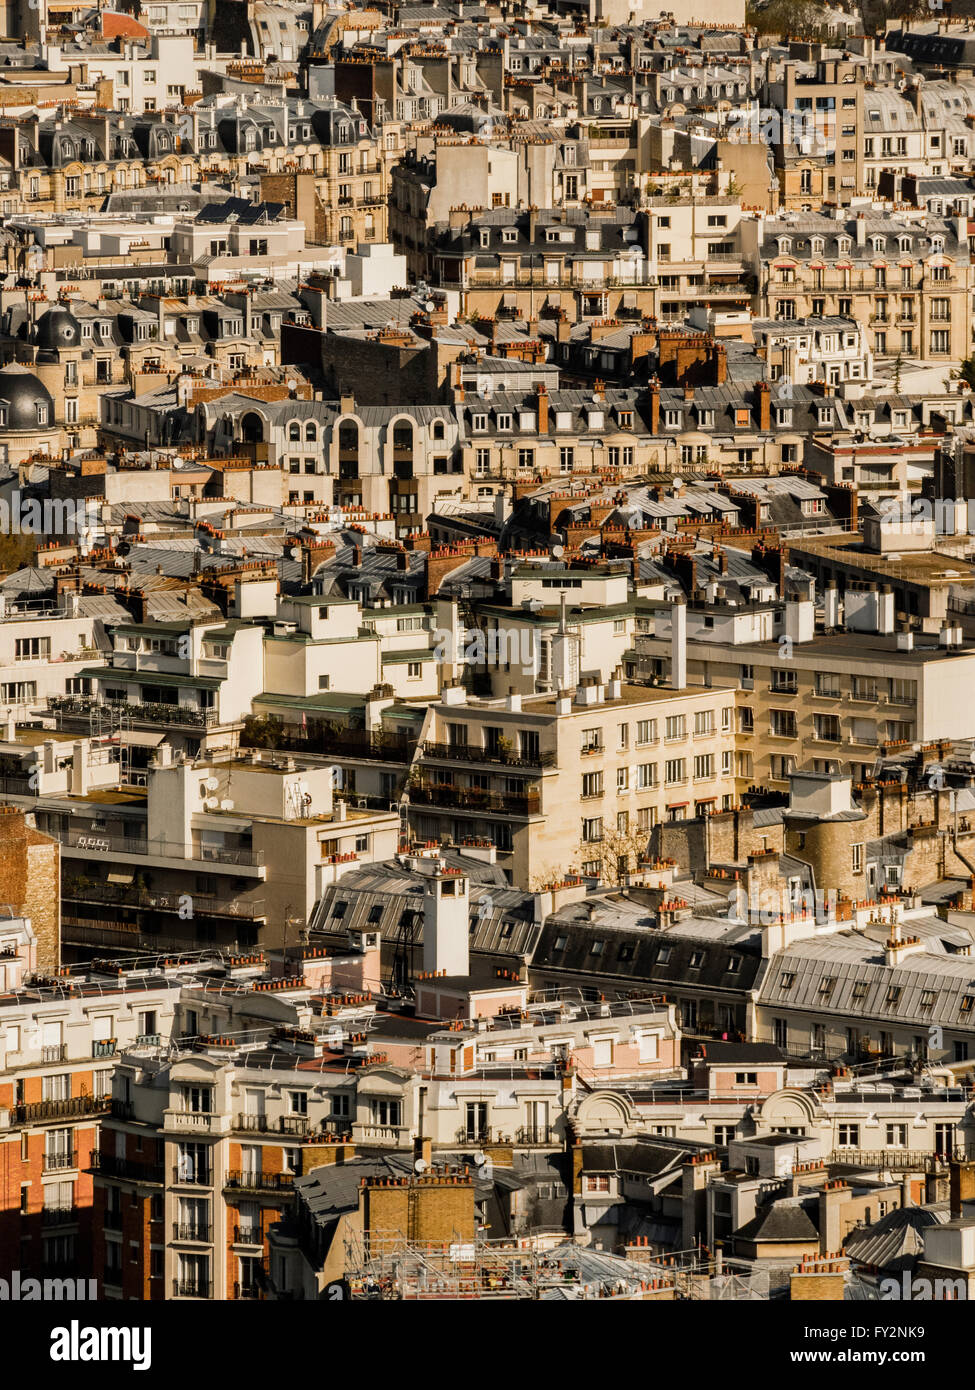 Aerial view of congested buildings in Paris, France. Stock Photo